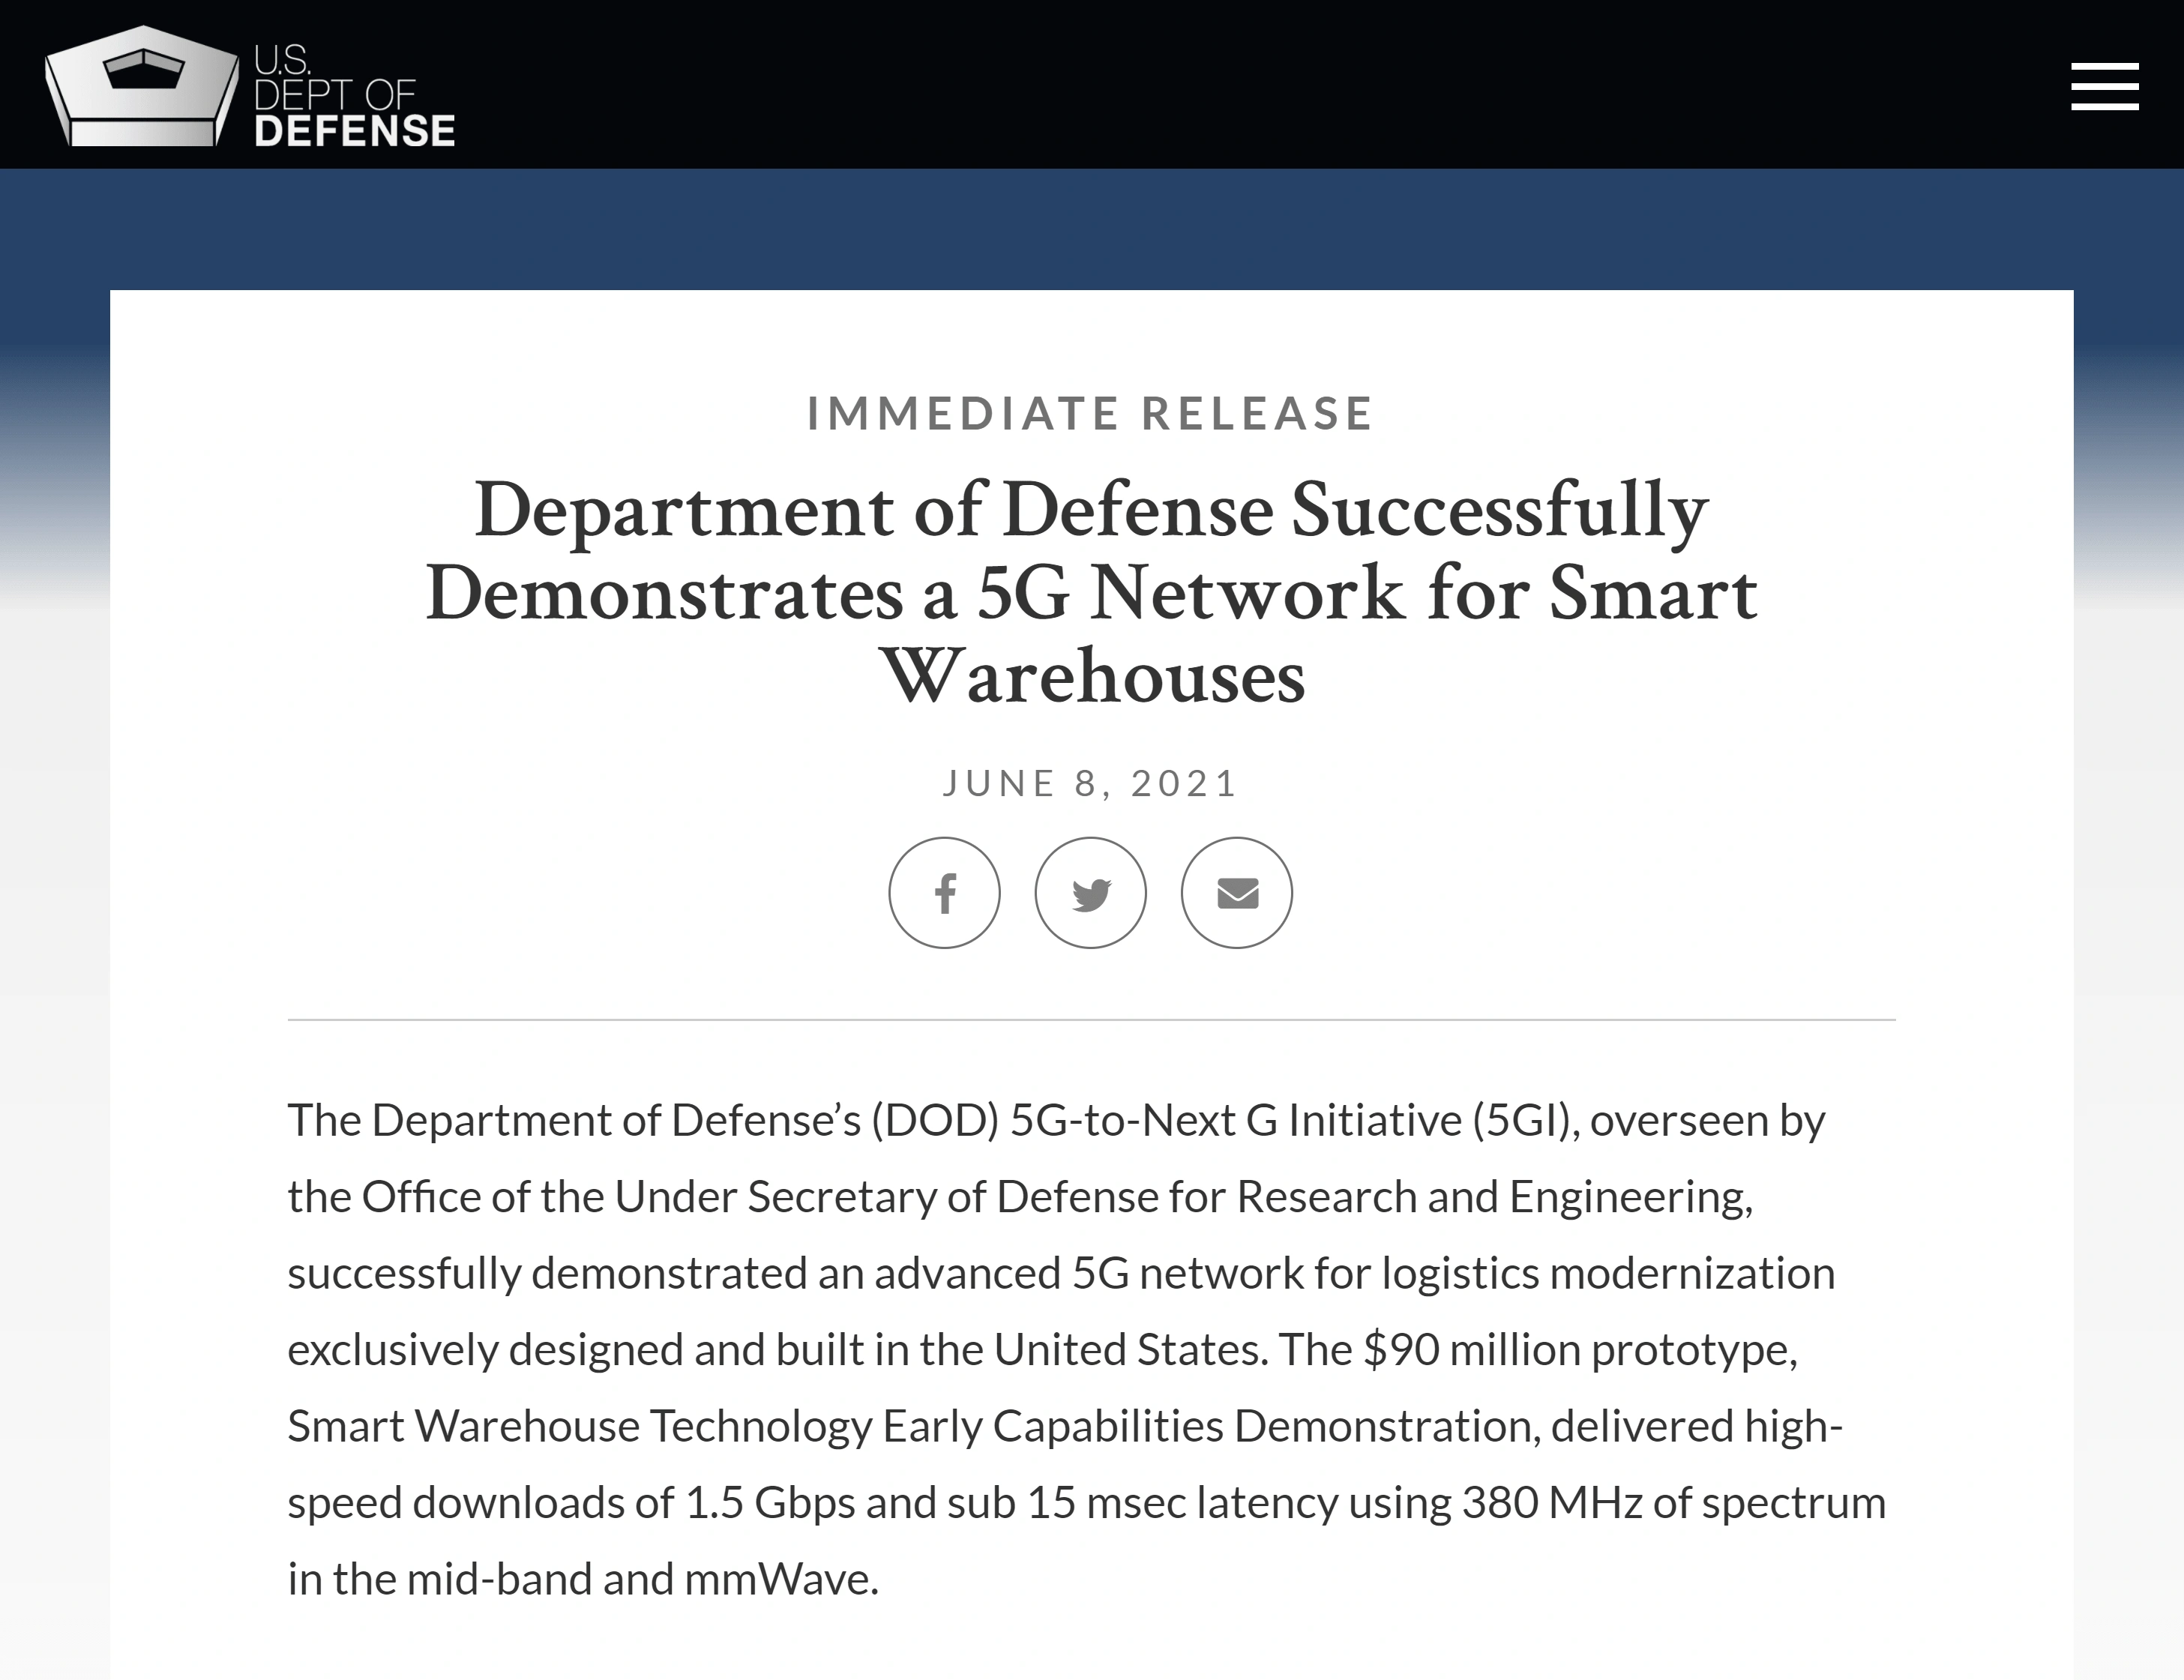 dod-successfully-demonstrates-5g-netw...